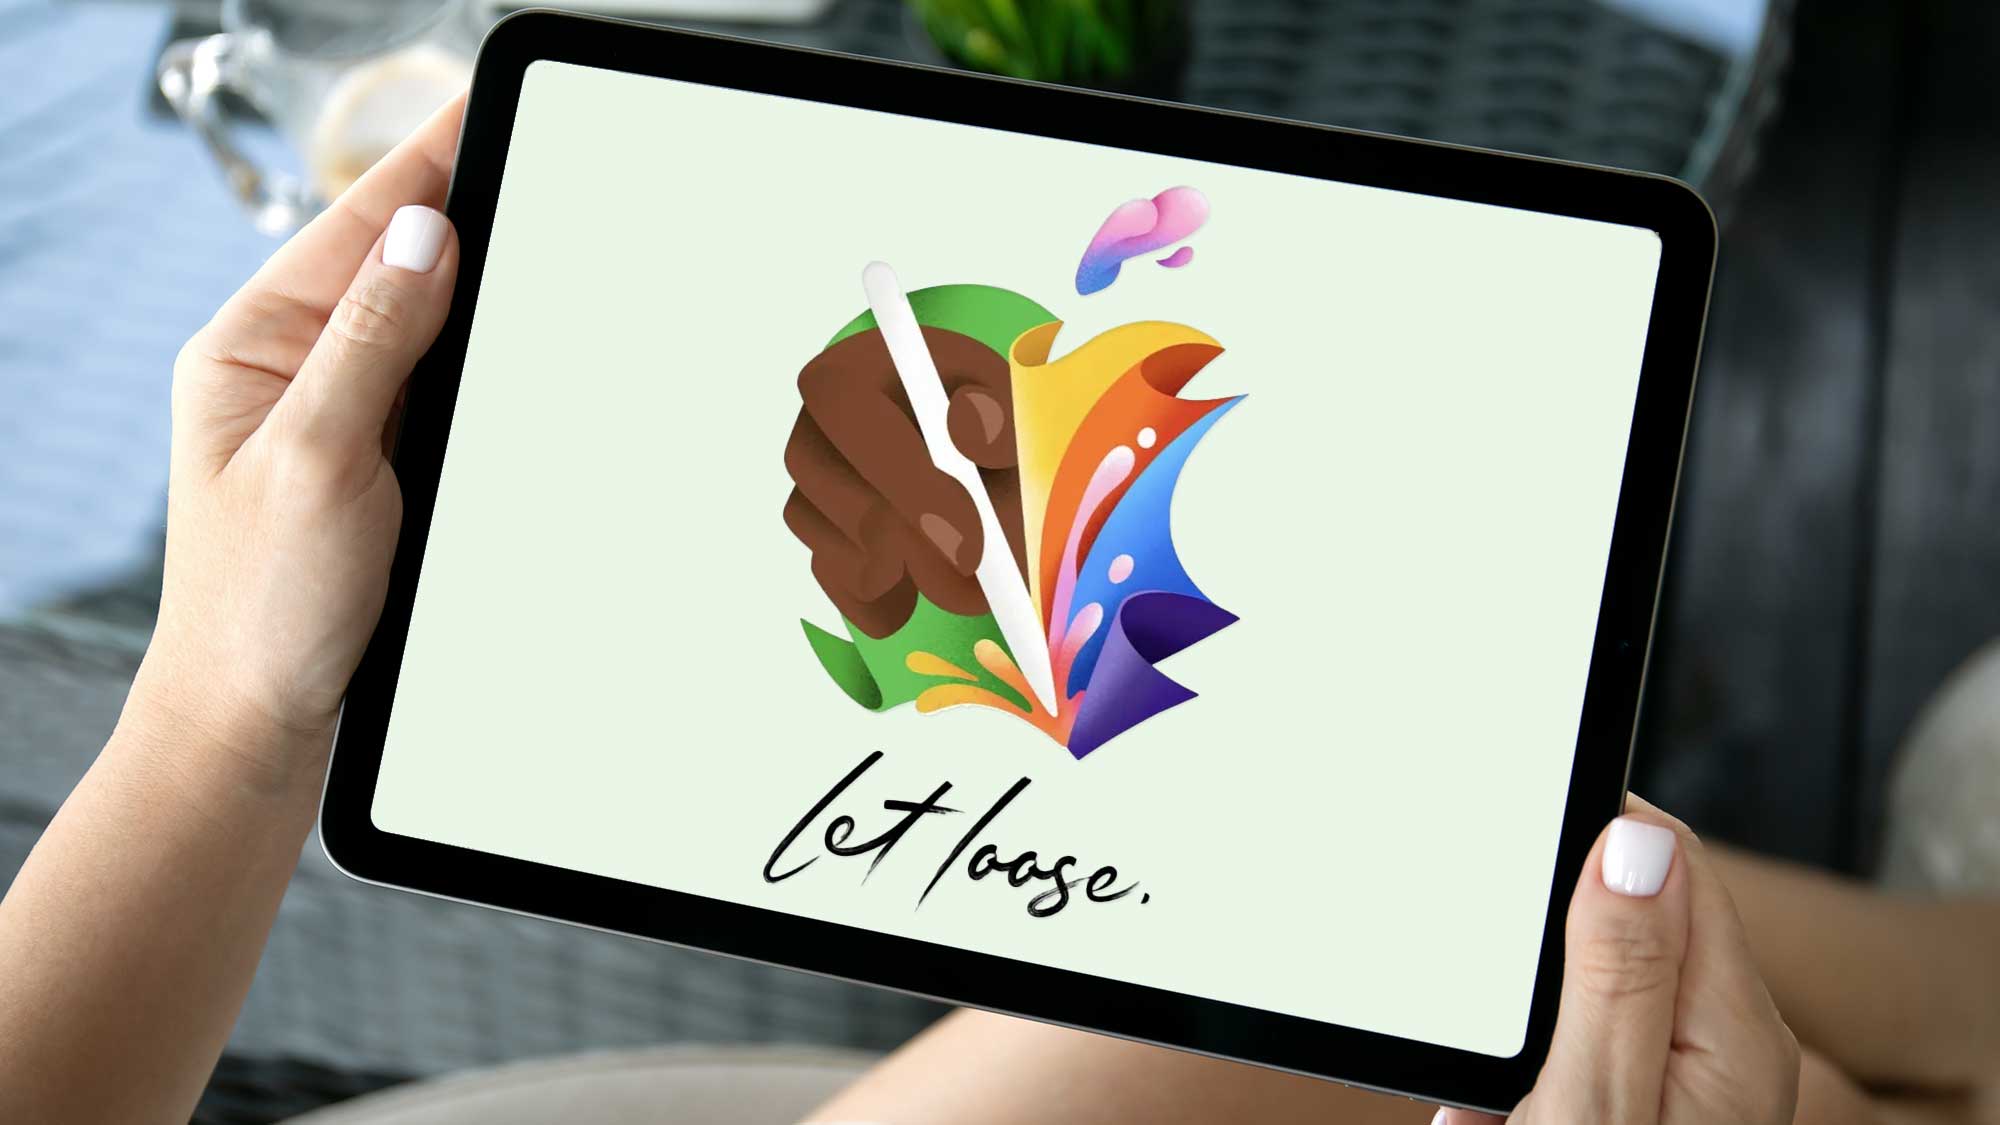 Apple 'Let Loose' Event New iPad Pro and iPad Air unveiled